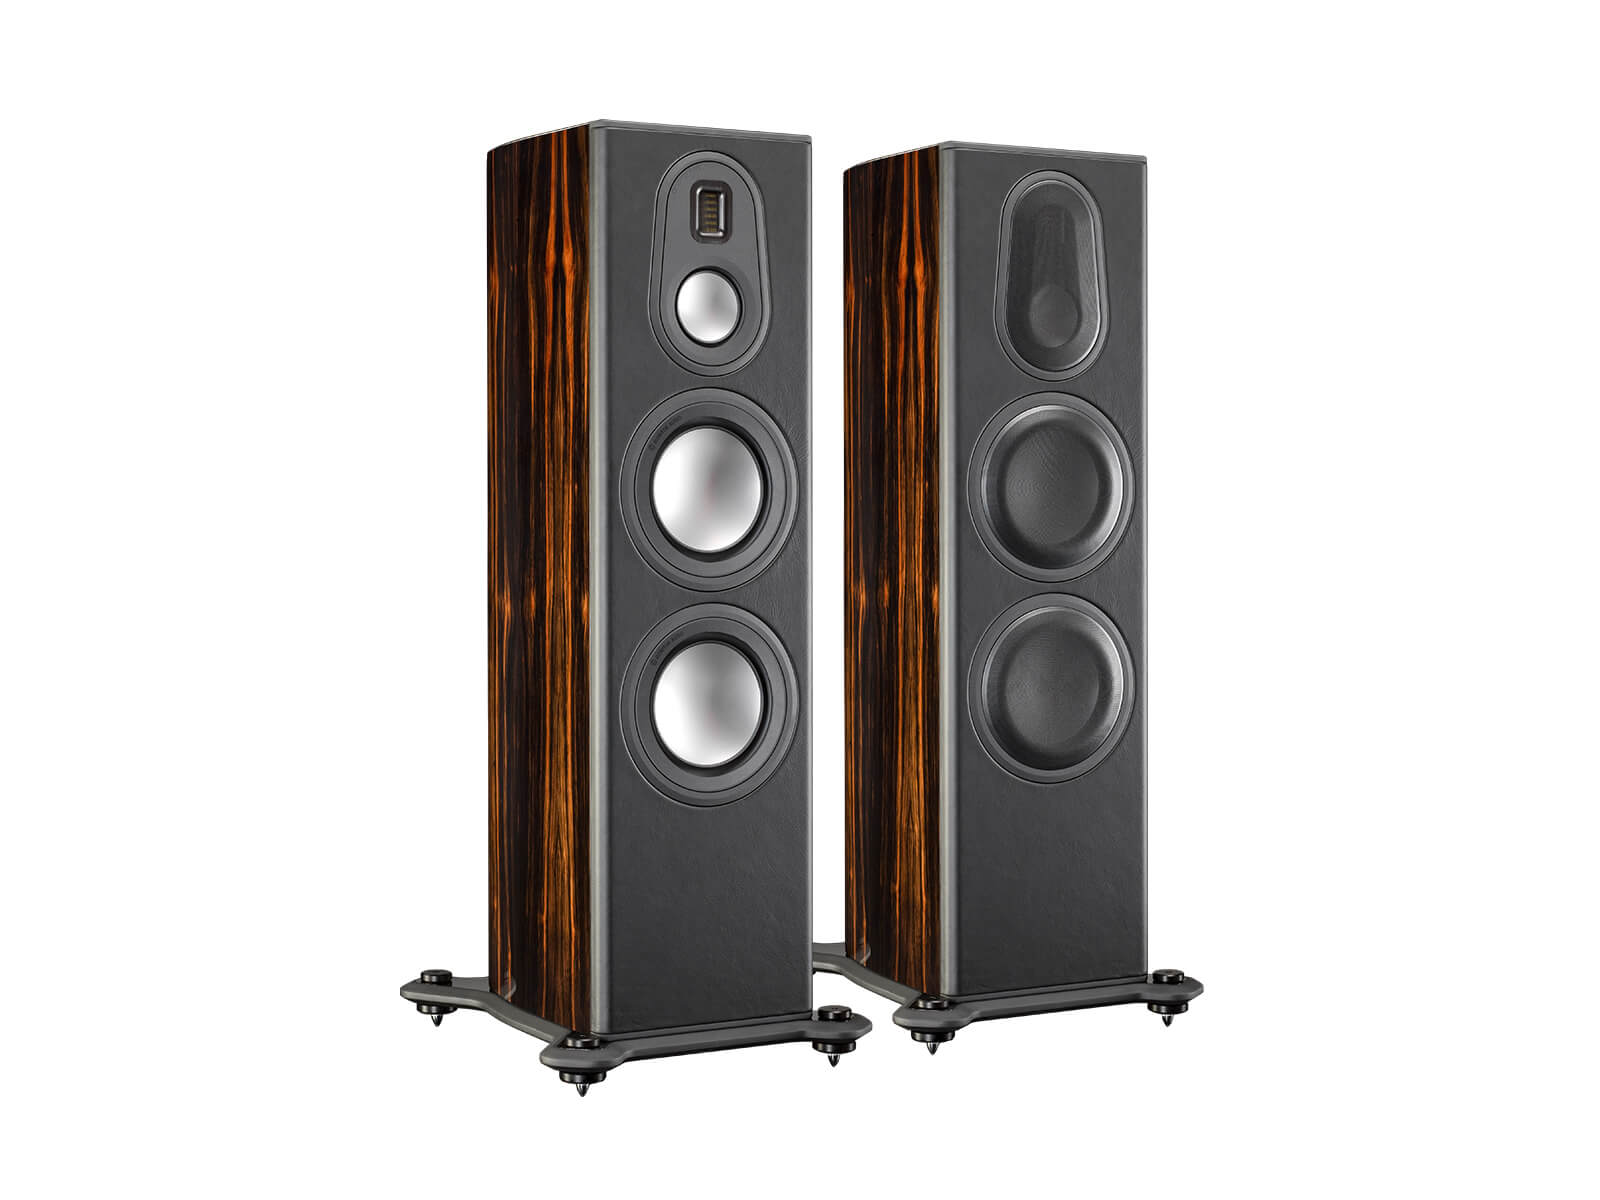 Platinum PL300 II, grille-less floorstanding speakers, with a piano black lacquer finish.